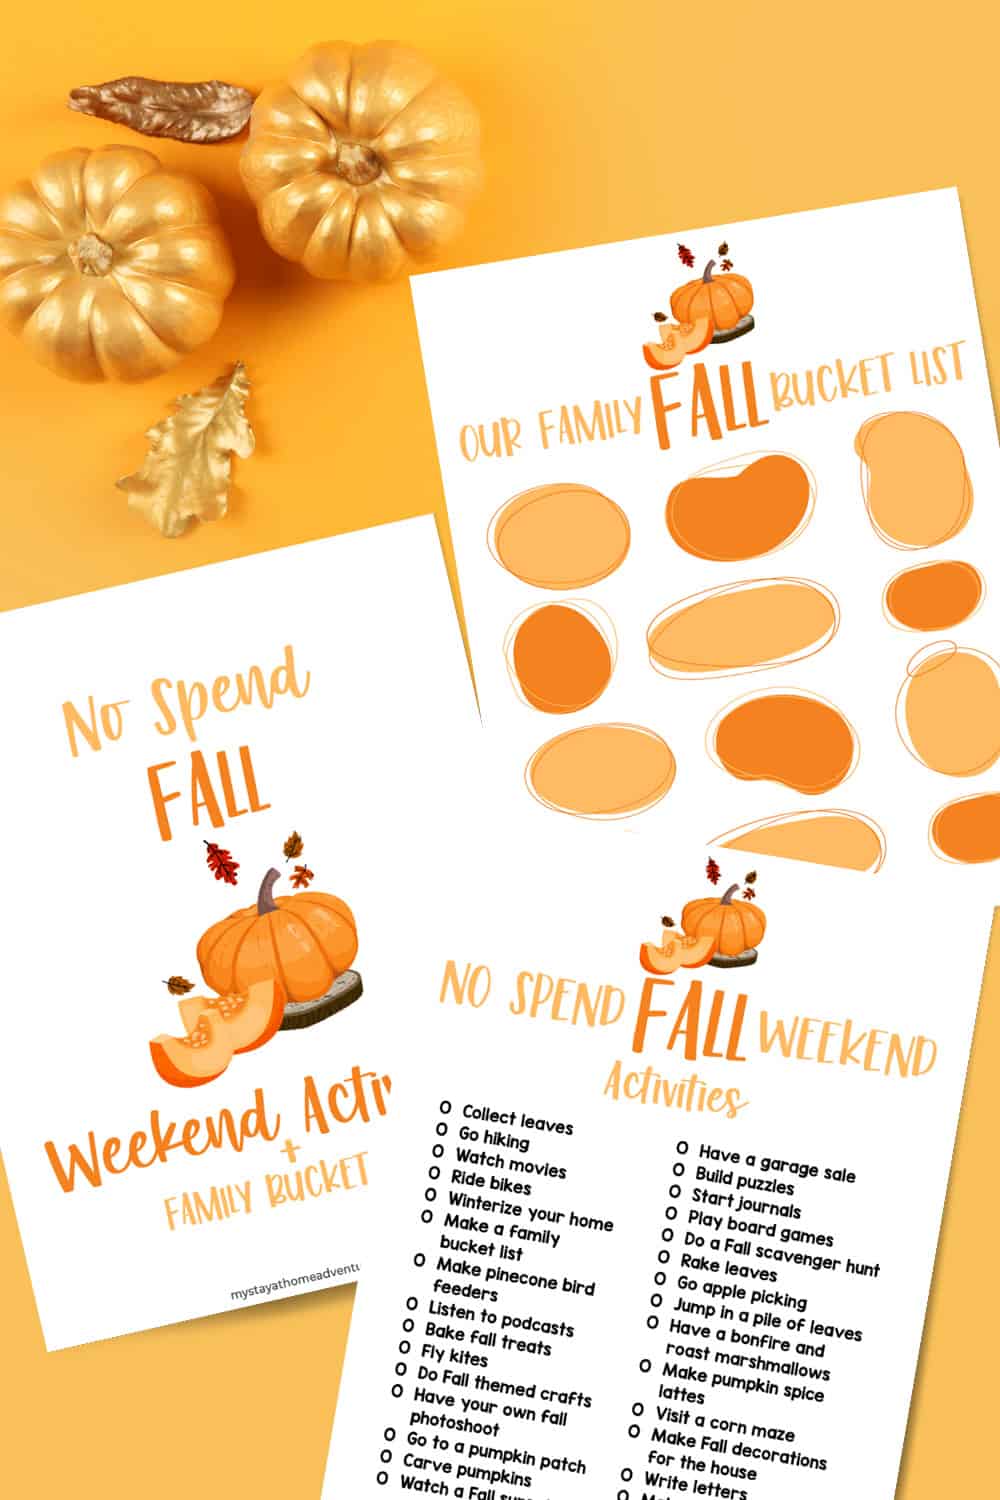 Do you want to enjoy some time outdoors without spending a penny? Here are no-spend fall weekend activities that will keep your kids entertained. Free printable included! via @mystayathome